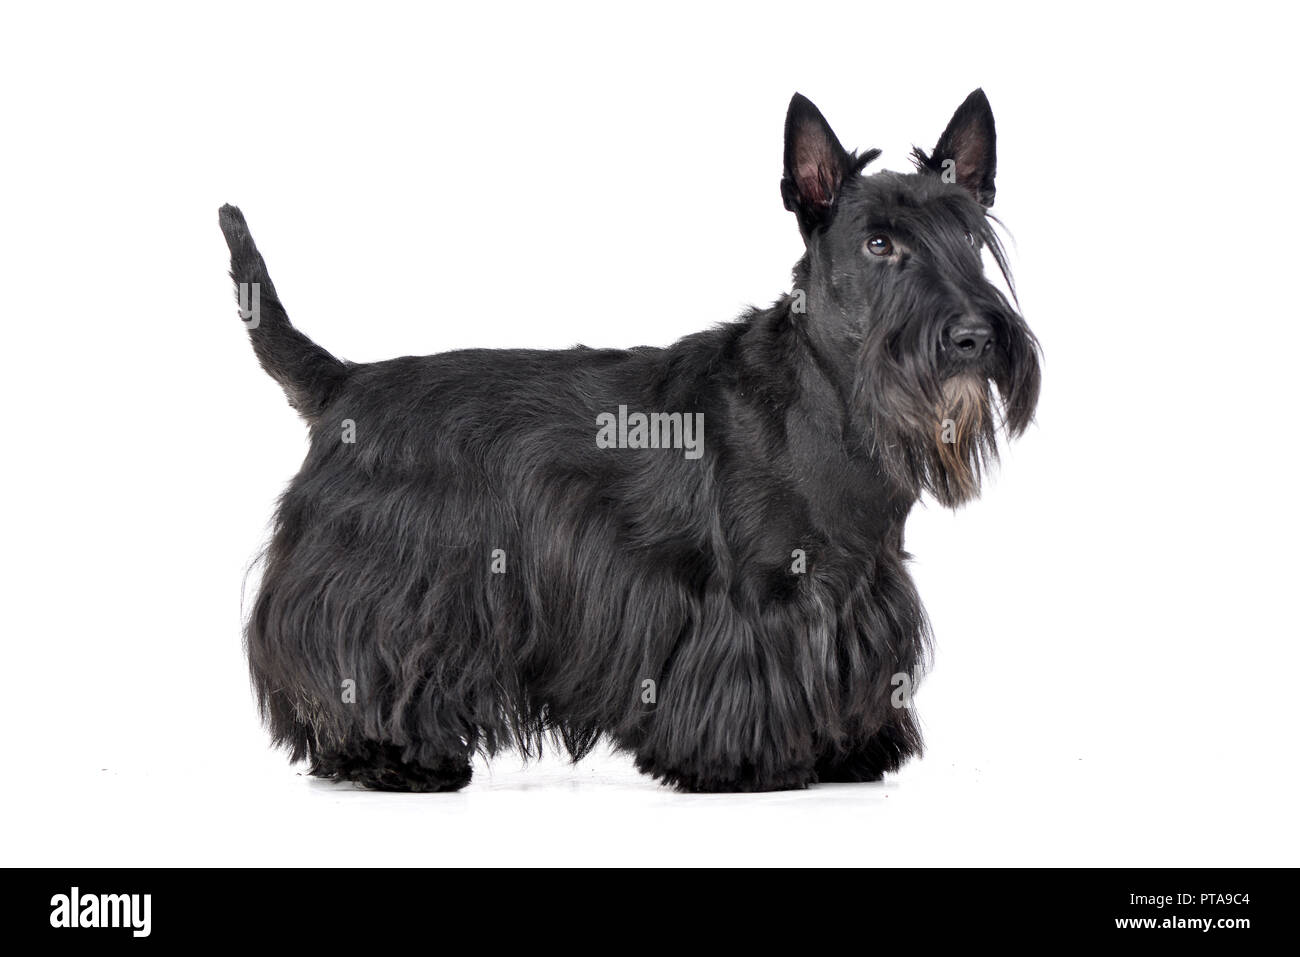 Studio shot of an adorable Scottish terrier standing on white background. Stock Photo